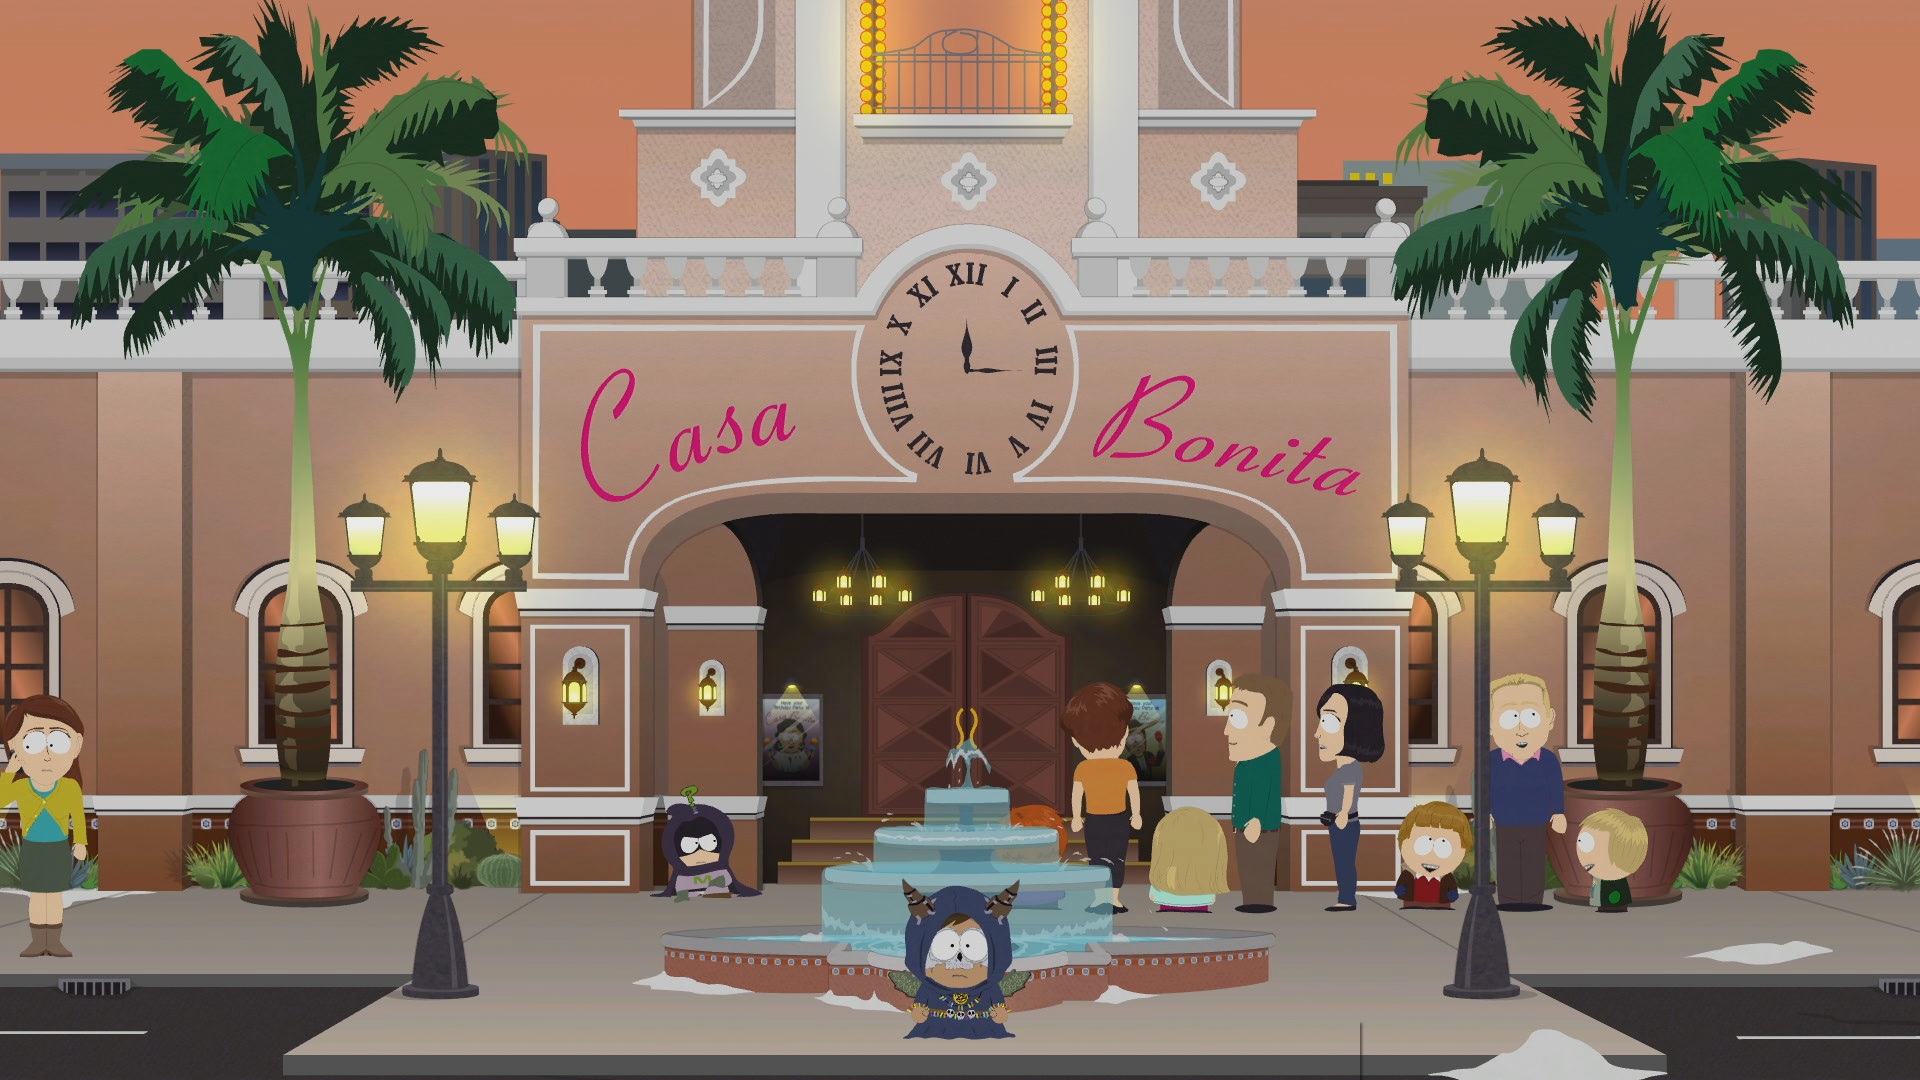 Mysterion, Coon, And The New Kid Set Out To Rescue - Dusk Till Casa Bonita , HD Wallpaper & Backgrounds